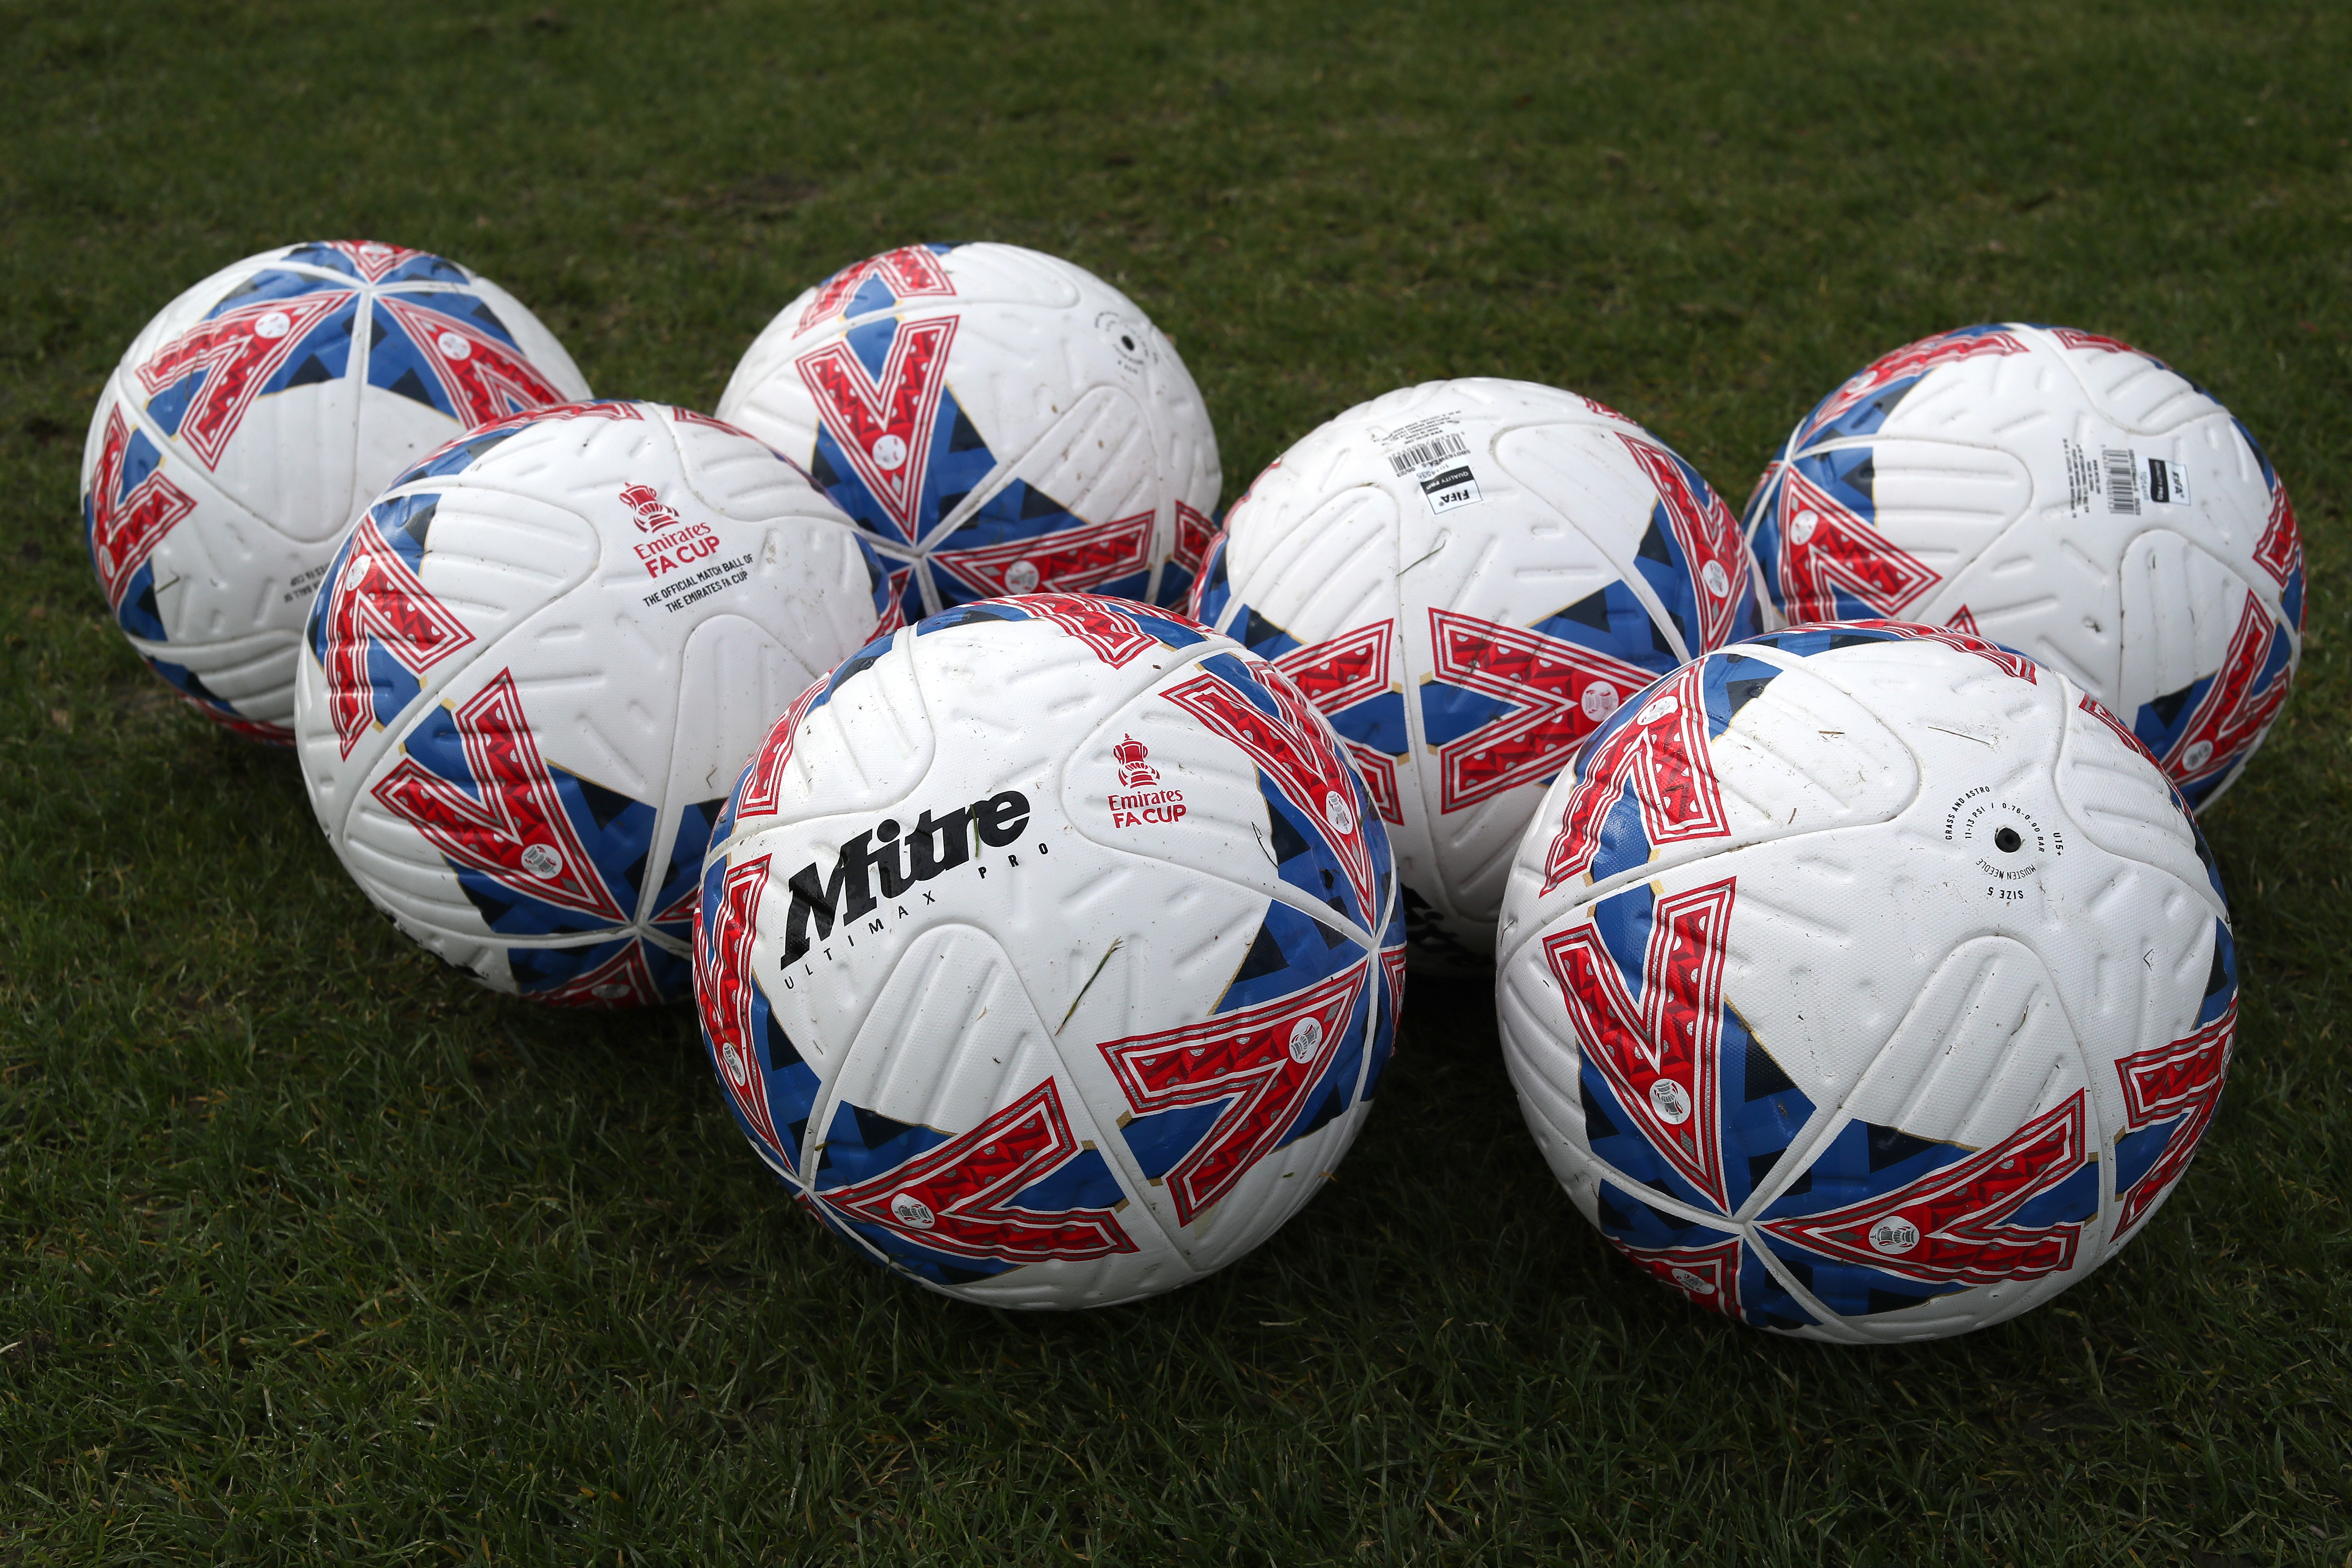 Mitre FA Cup footballs on the training pitch